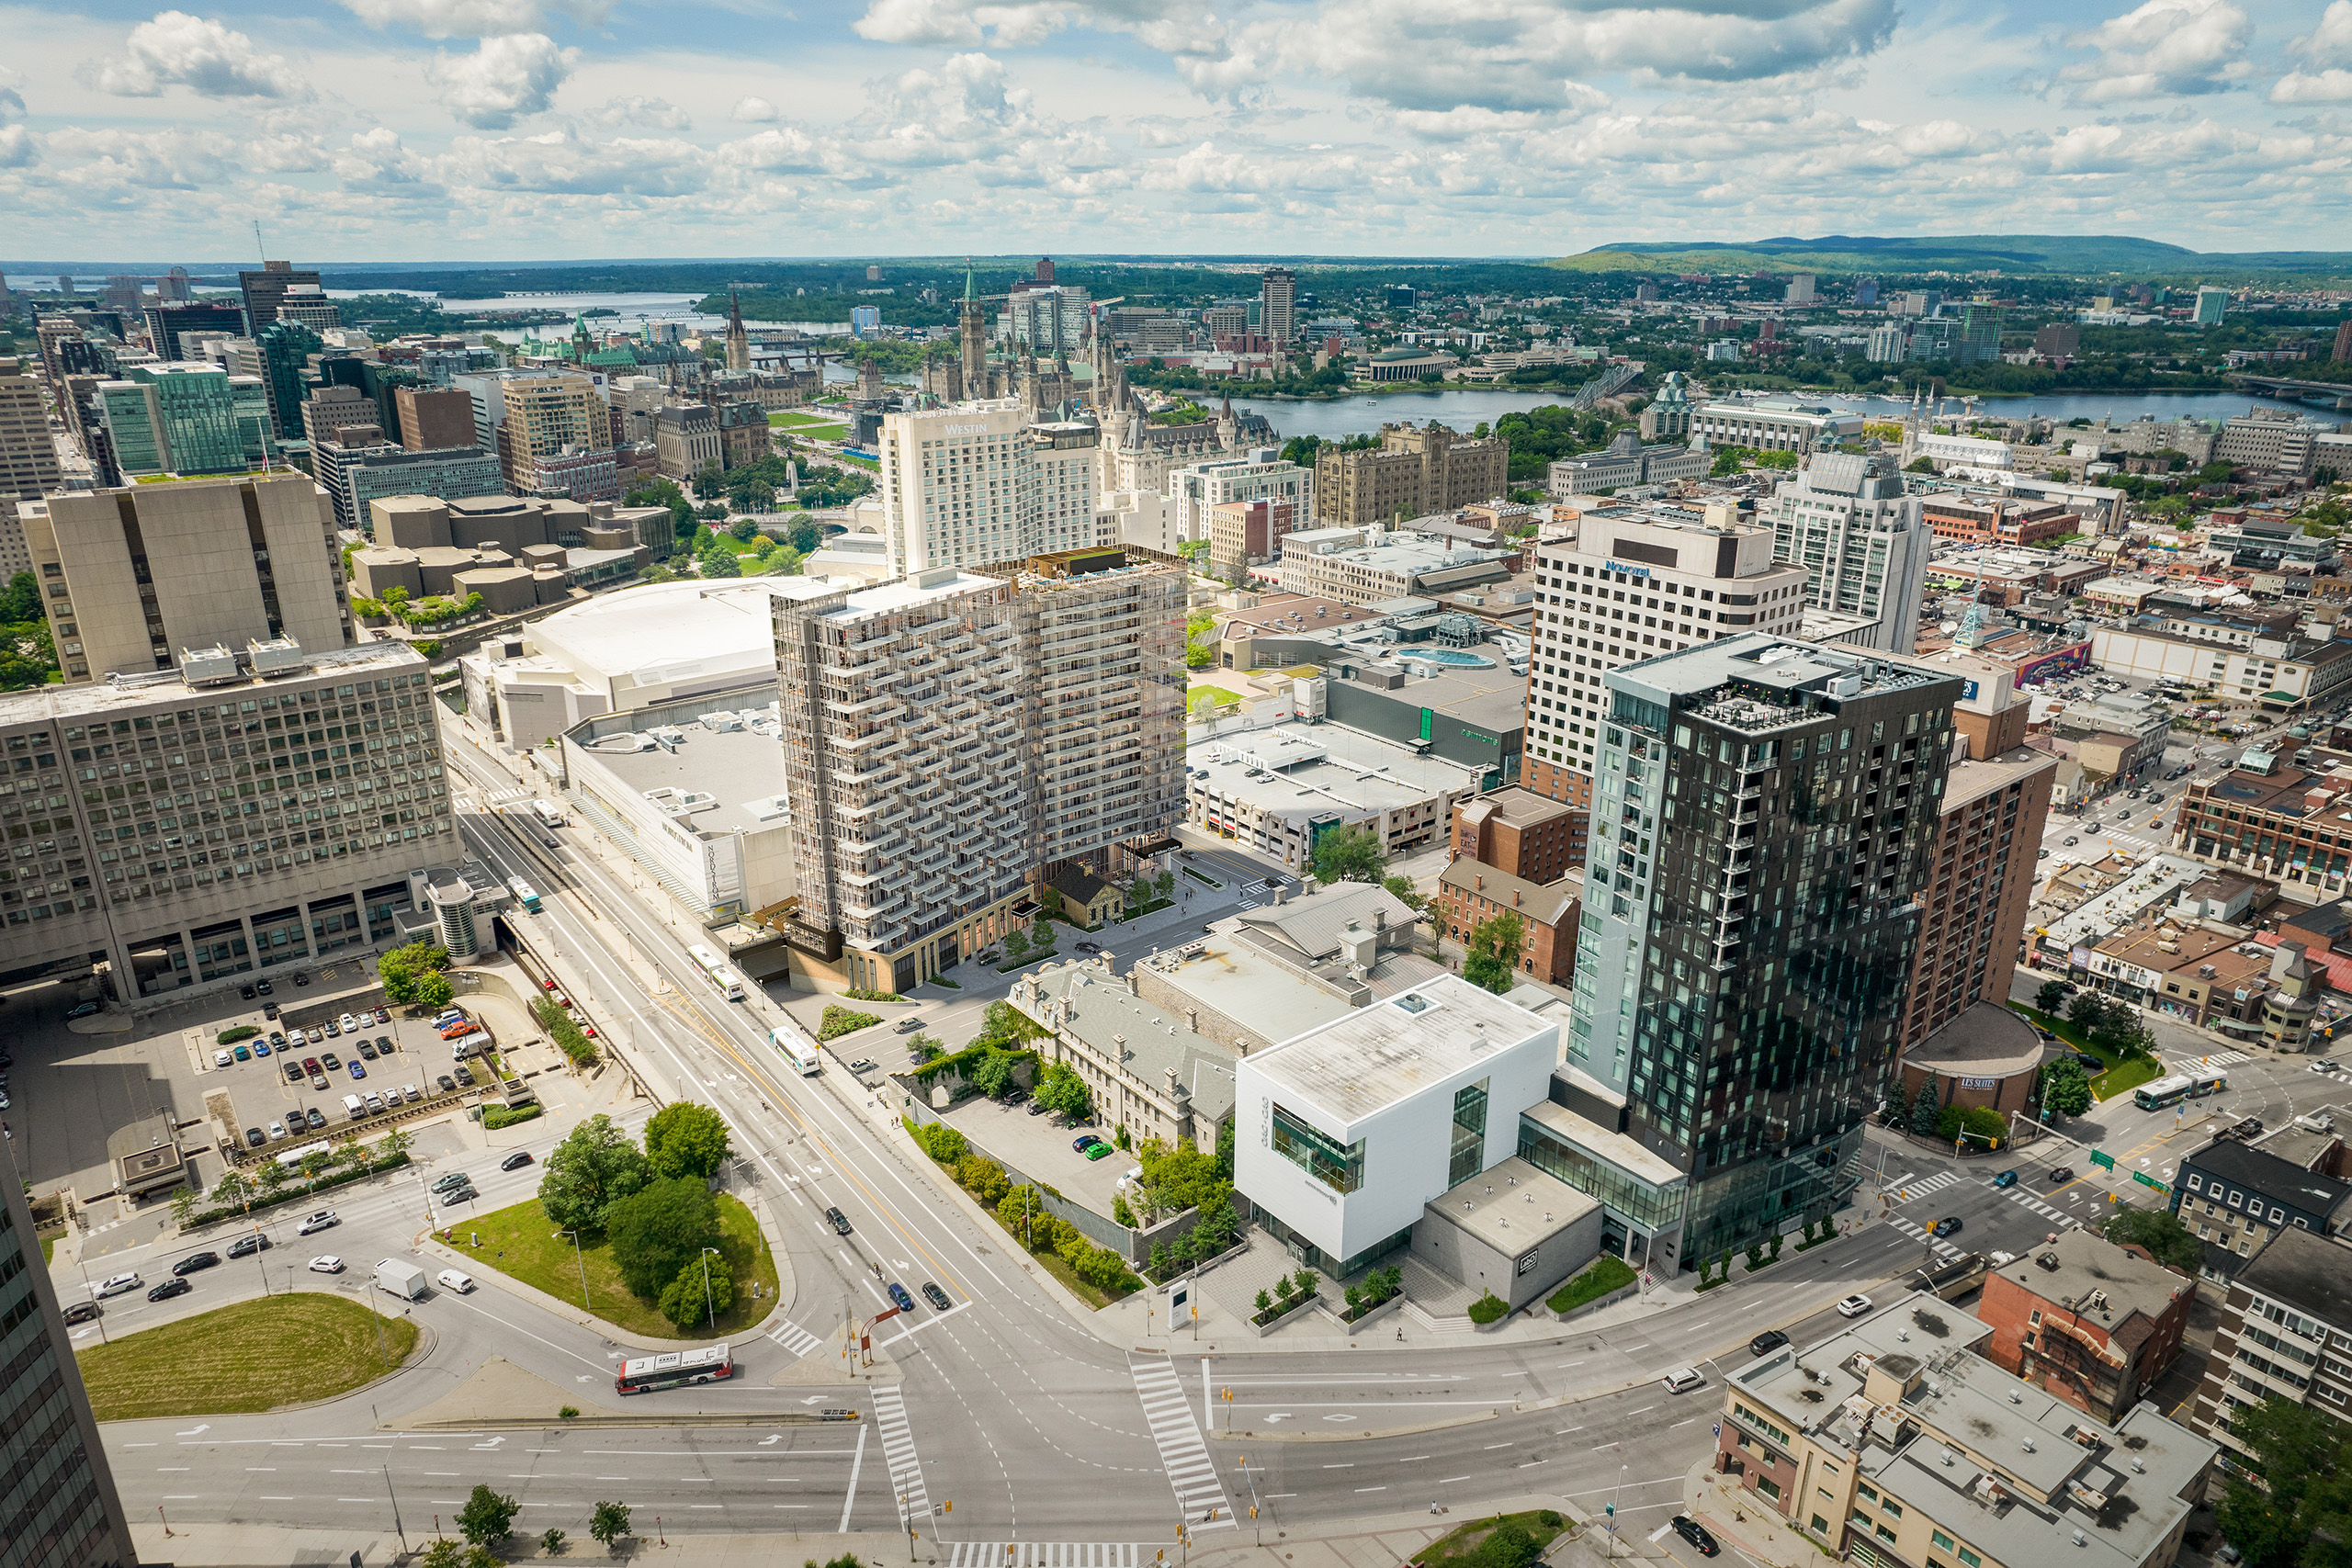 An aerial view showing The Residence in the Ottaw context and it's adjacency to the CF Rideau Centre.